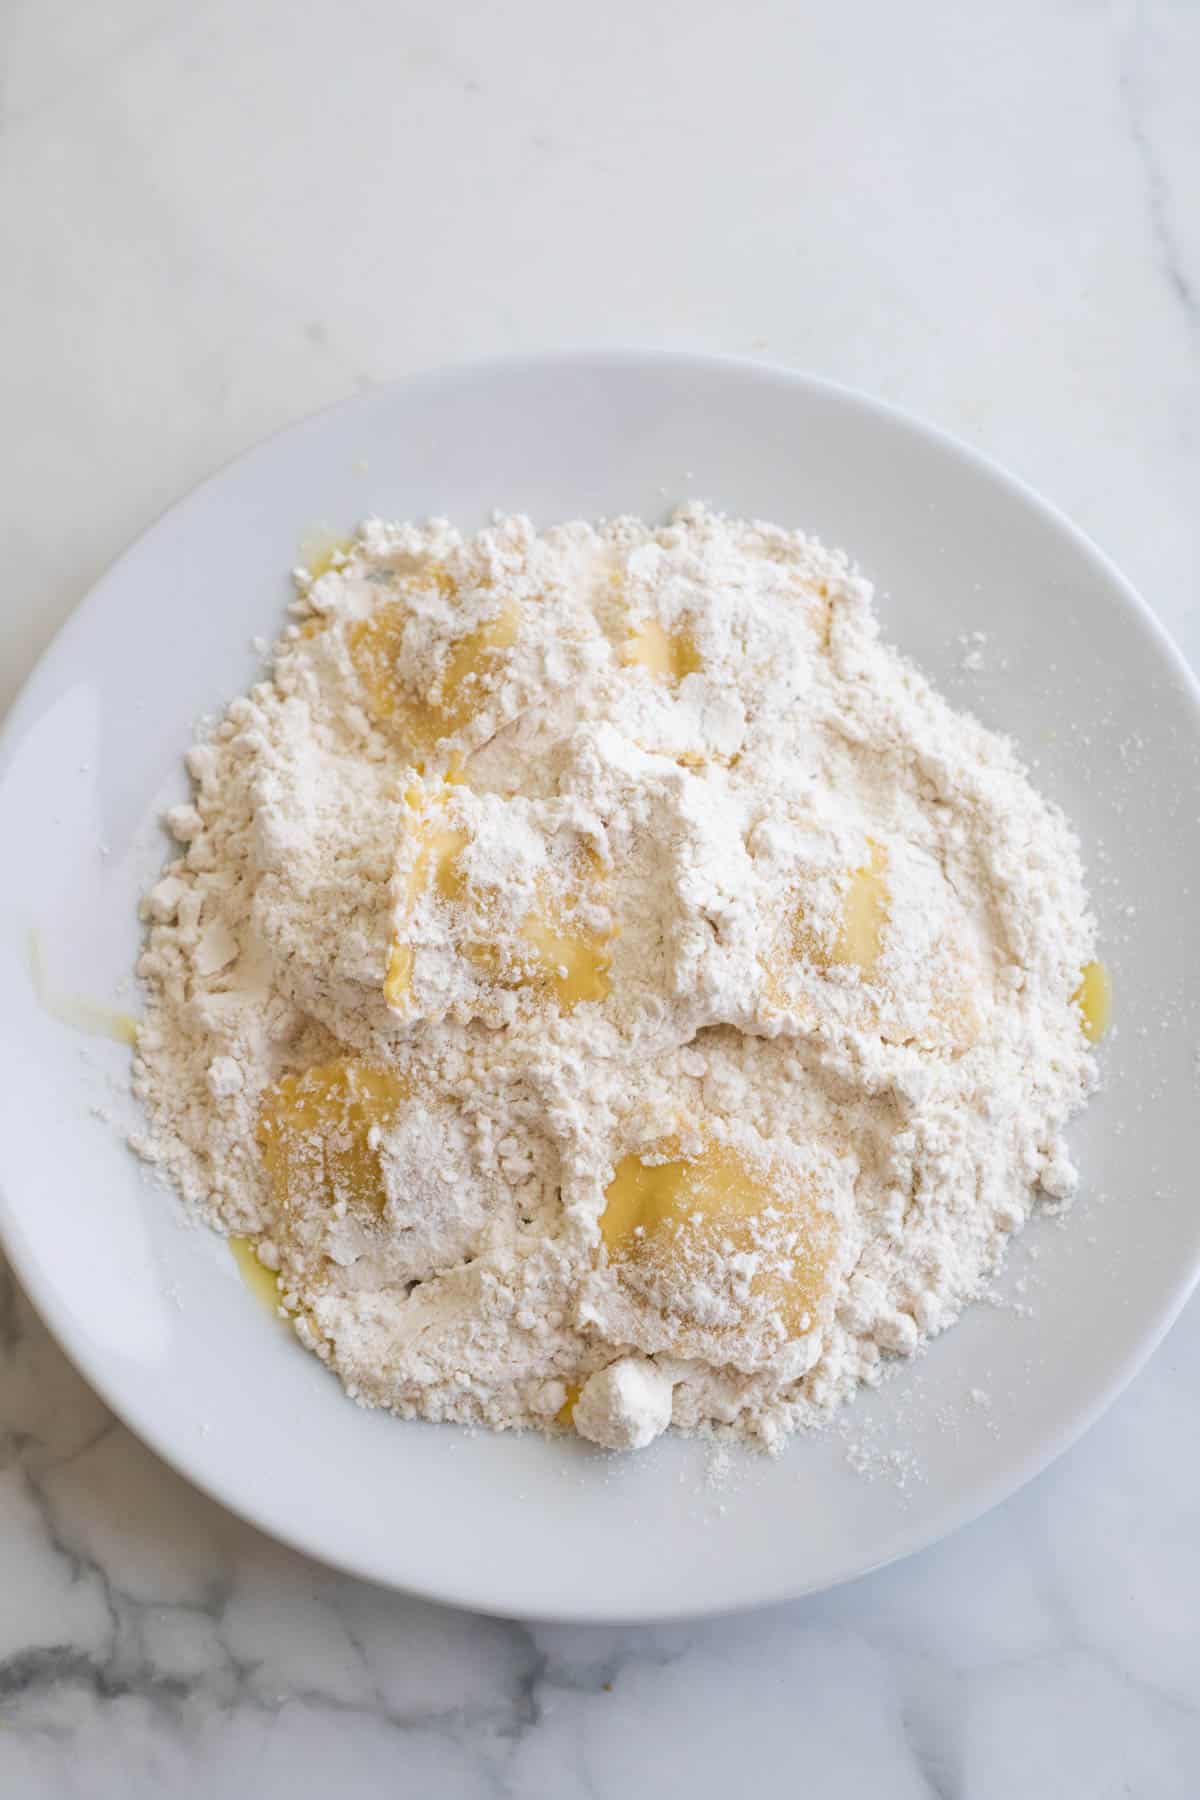 A plate of ravioli coated in flour.